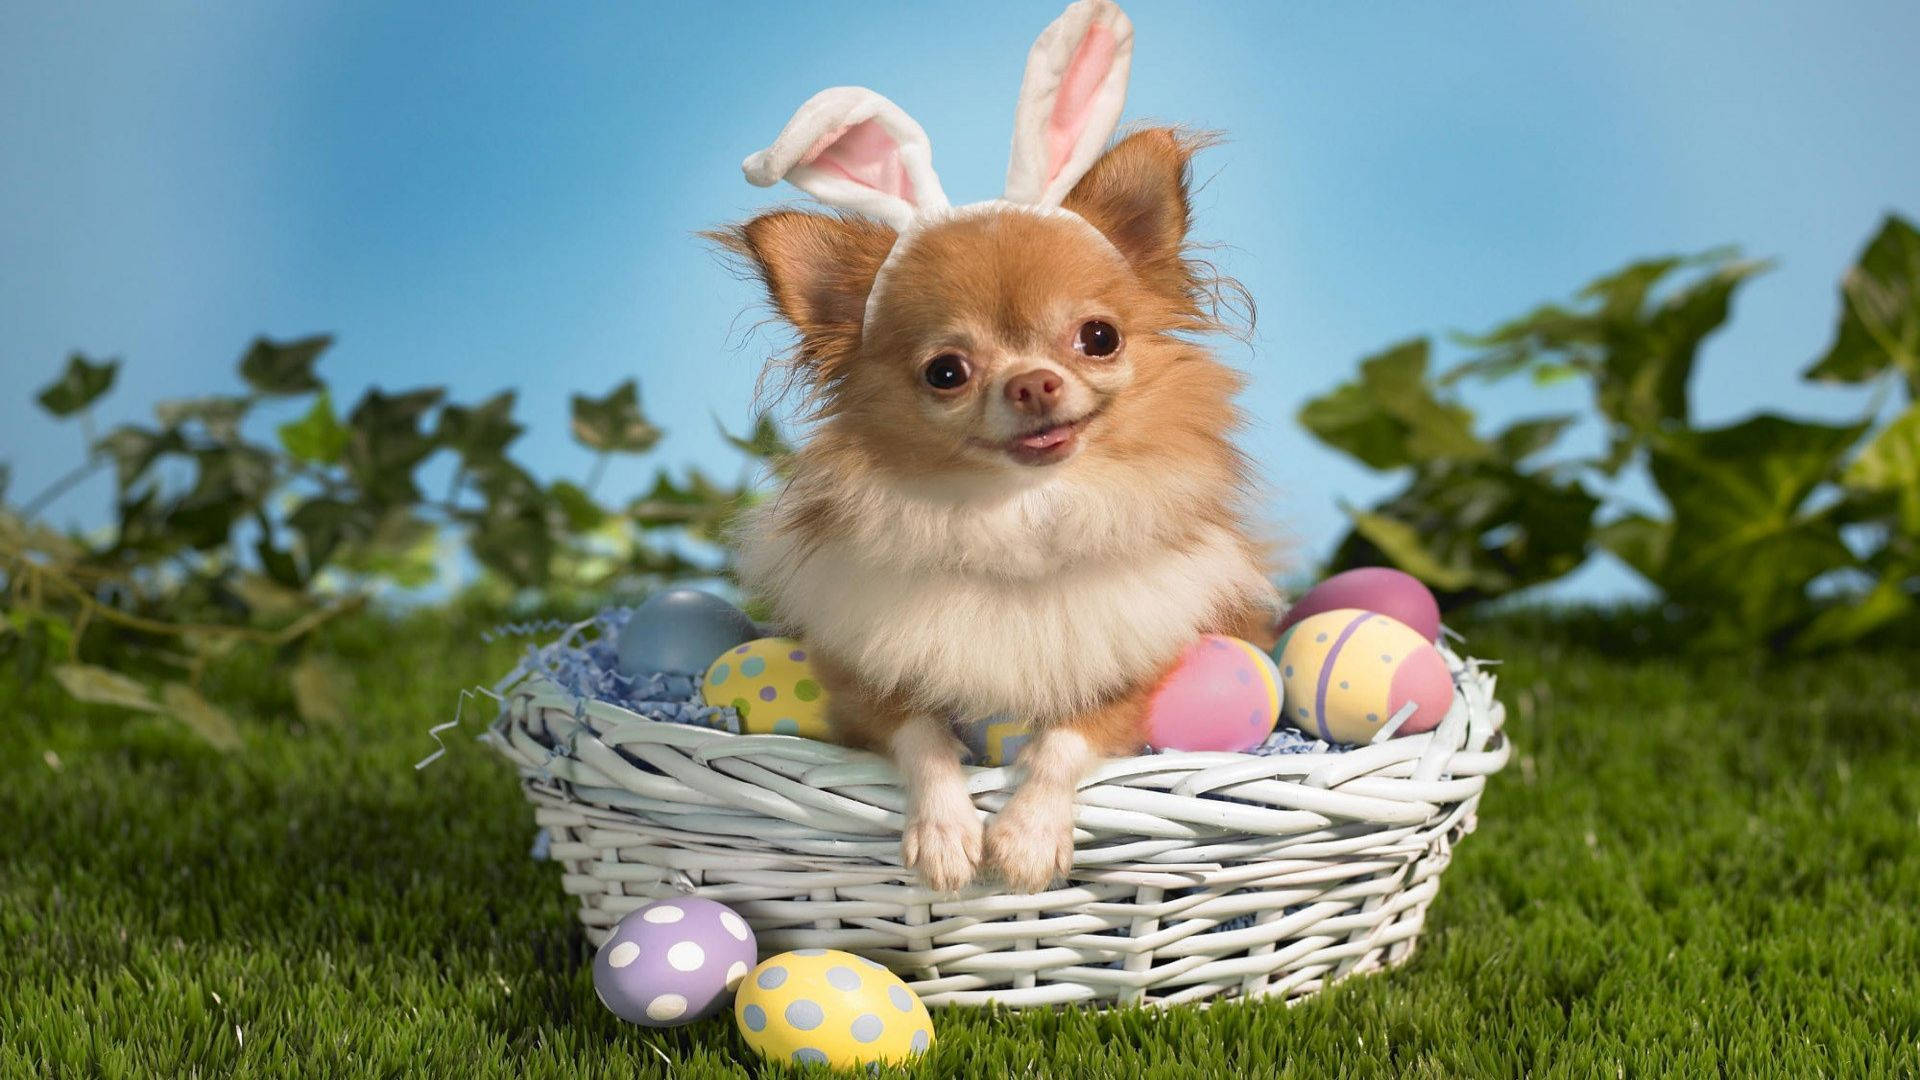 Celebrate Easter in Style with This Adorable Chihuahua Wallpaper